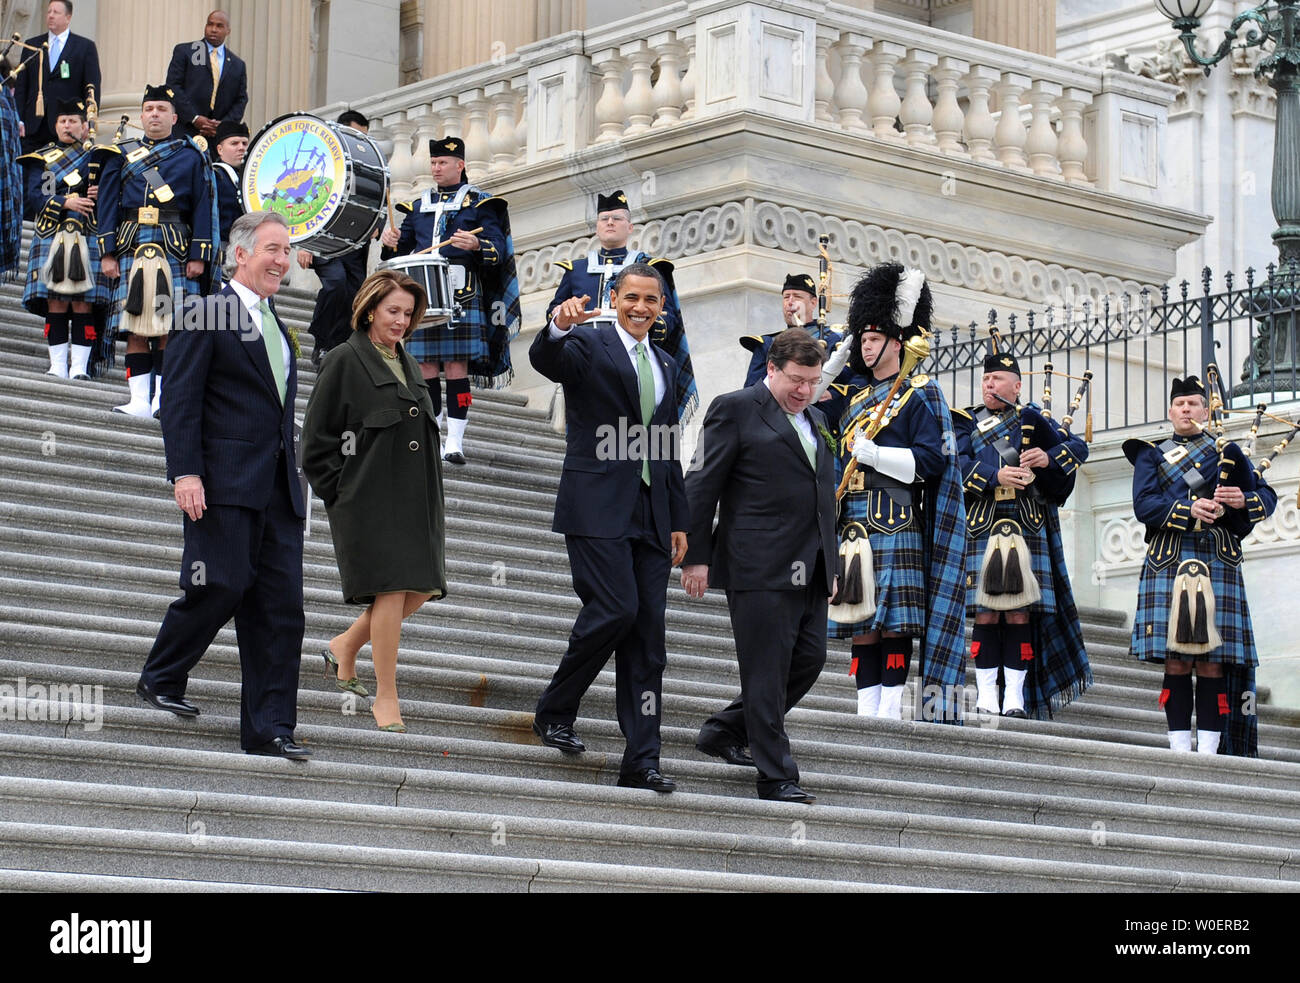 U.S. President Barack Obama (2nd-R) walks with the Irish Taoiseach Brian Cowen (R) Speaker of the House Nancy Pelosi (2nd-L) and Rep. Richard Neal (D-MA) after a St. Patrick's Day Luncheon on Capitol Hill in Washington on March 17, 2009. (UPI Photo/Kevin Dietsch) Stock Photo